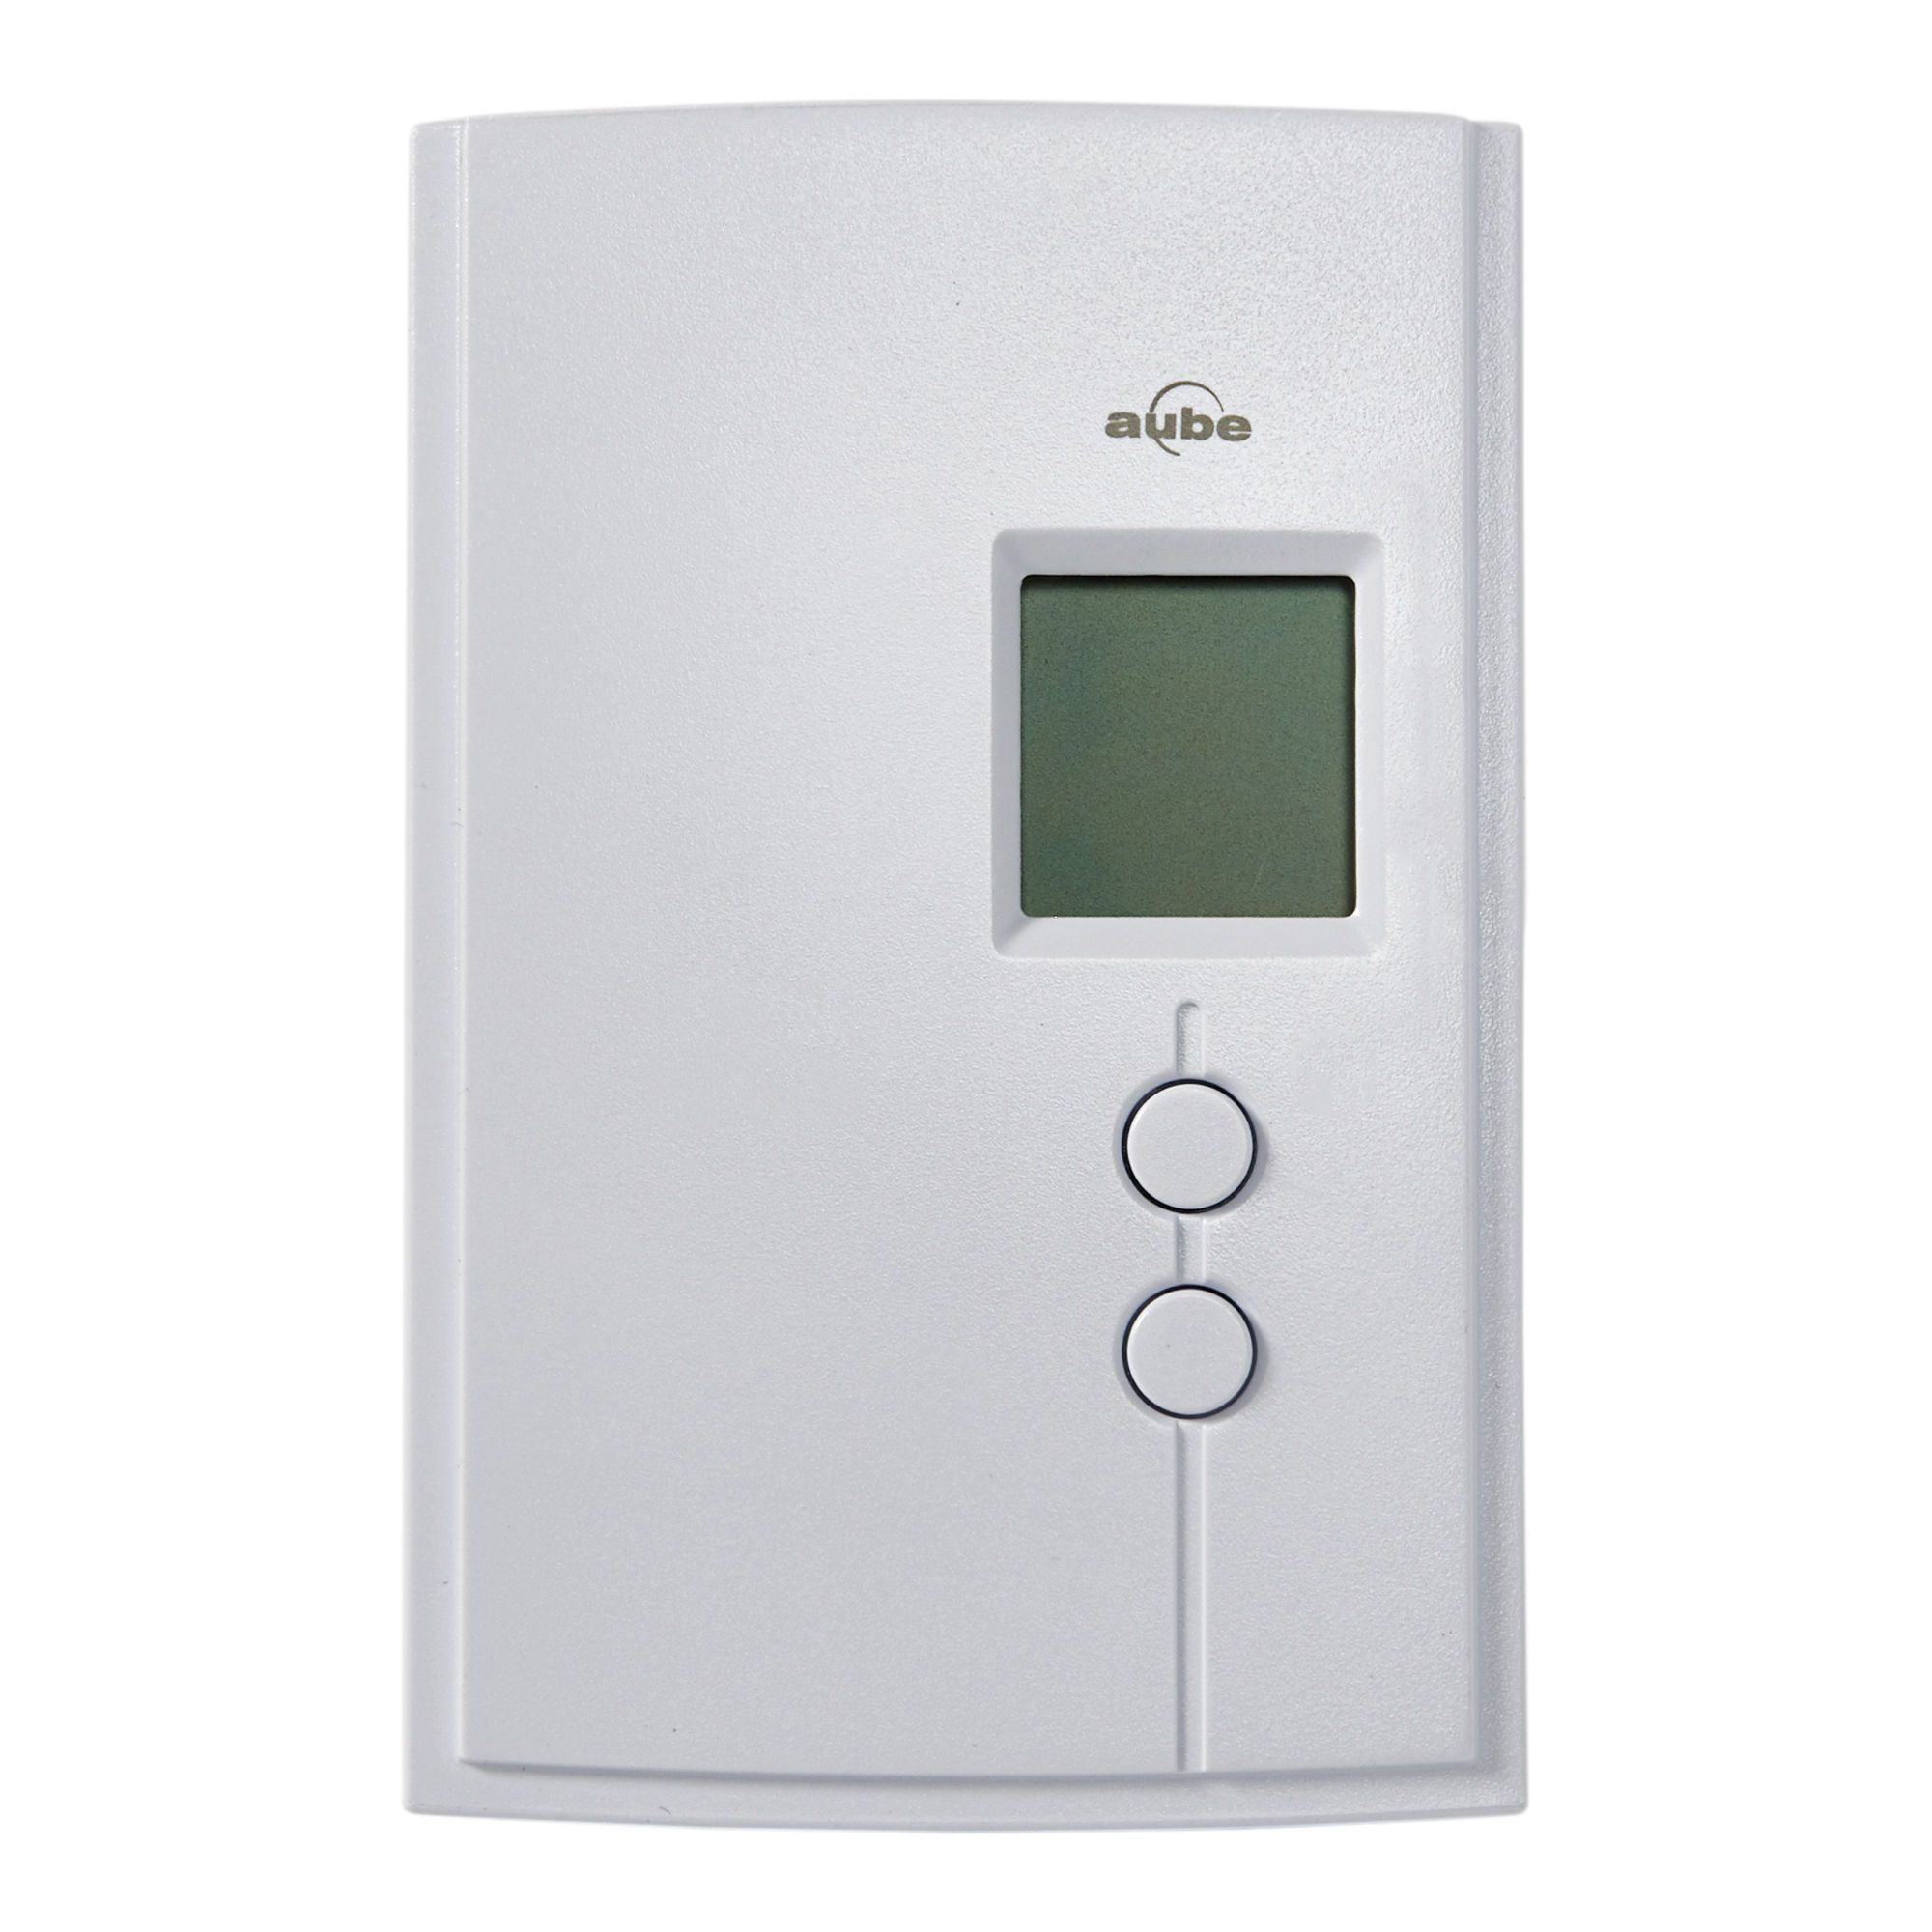 companion Agent Emperor Electronic Thermostat - White - 12.3 x 8.2 x 2.9 cm from AUBE | BMR